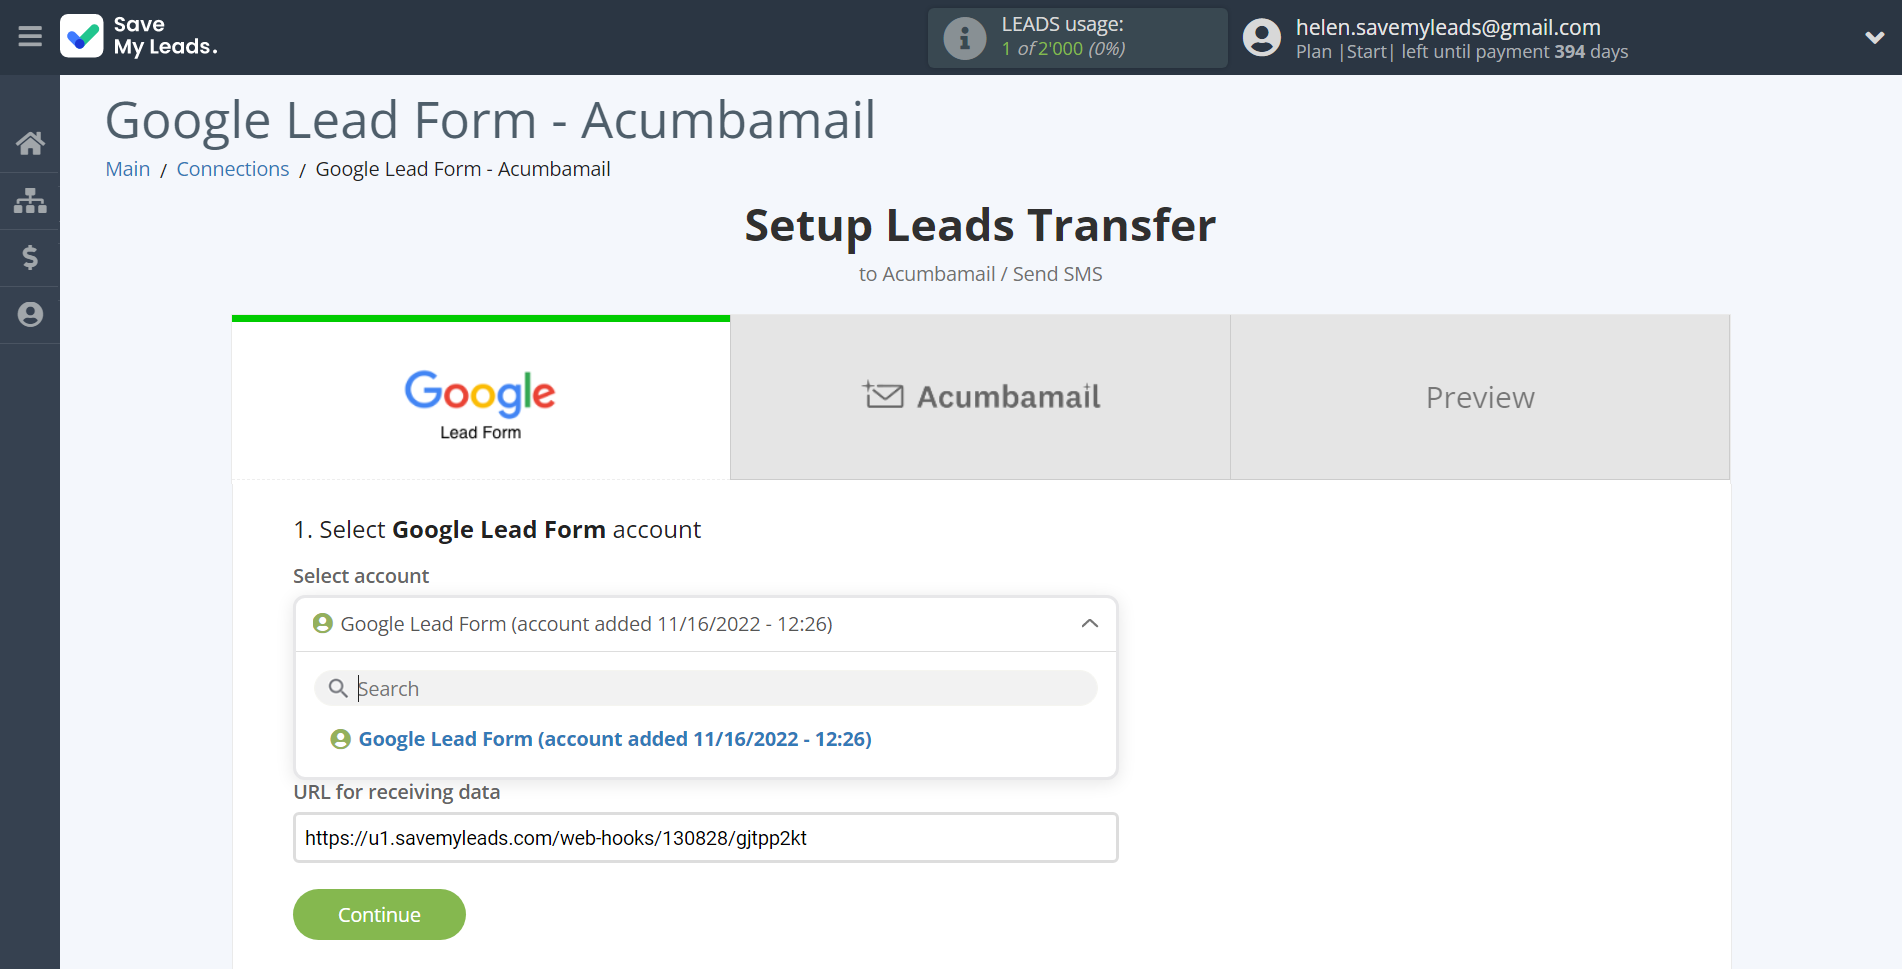 How to Connect Google Lead Form with Acumbamail Send SMS | Data Source account selection